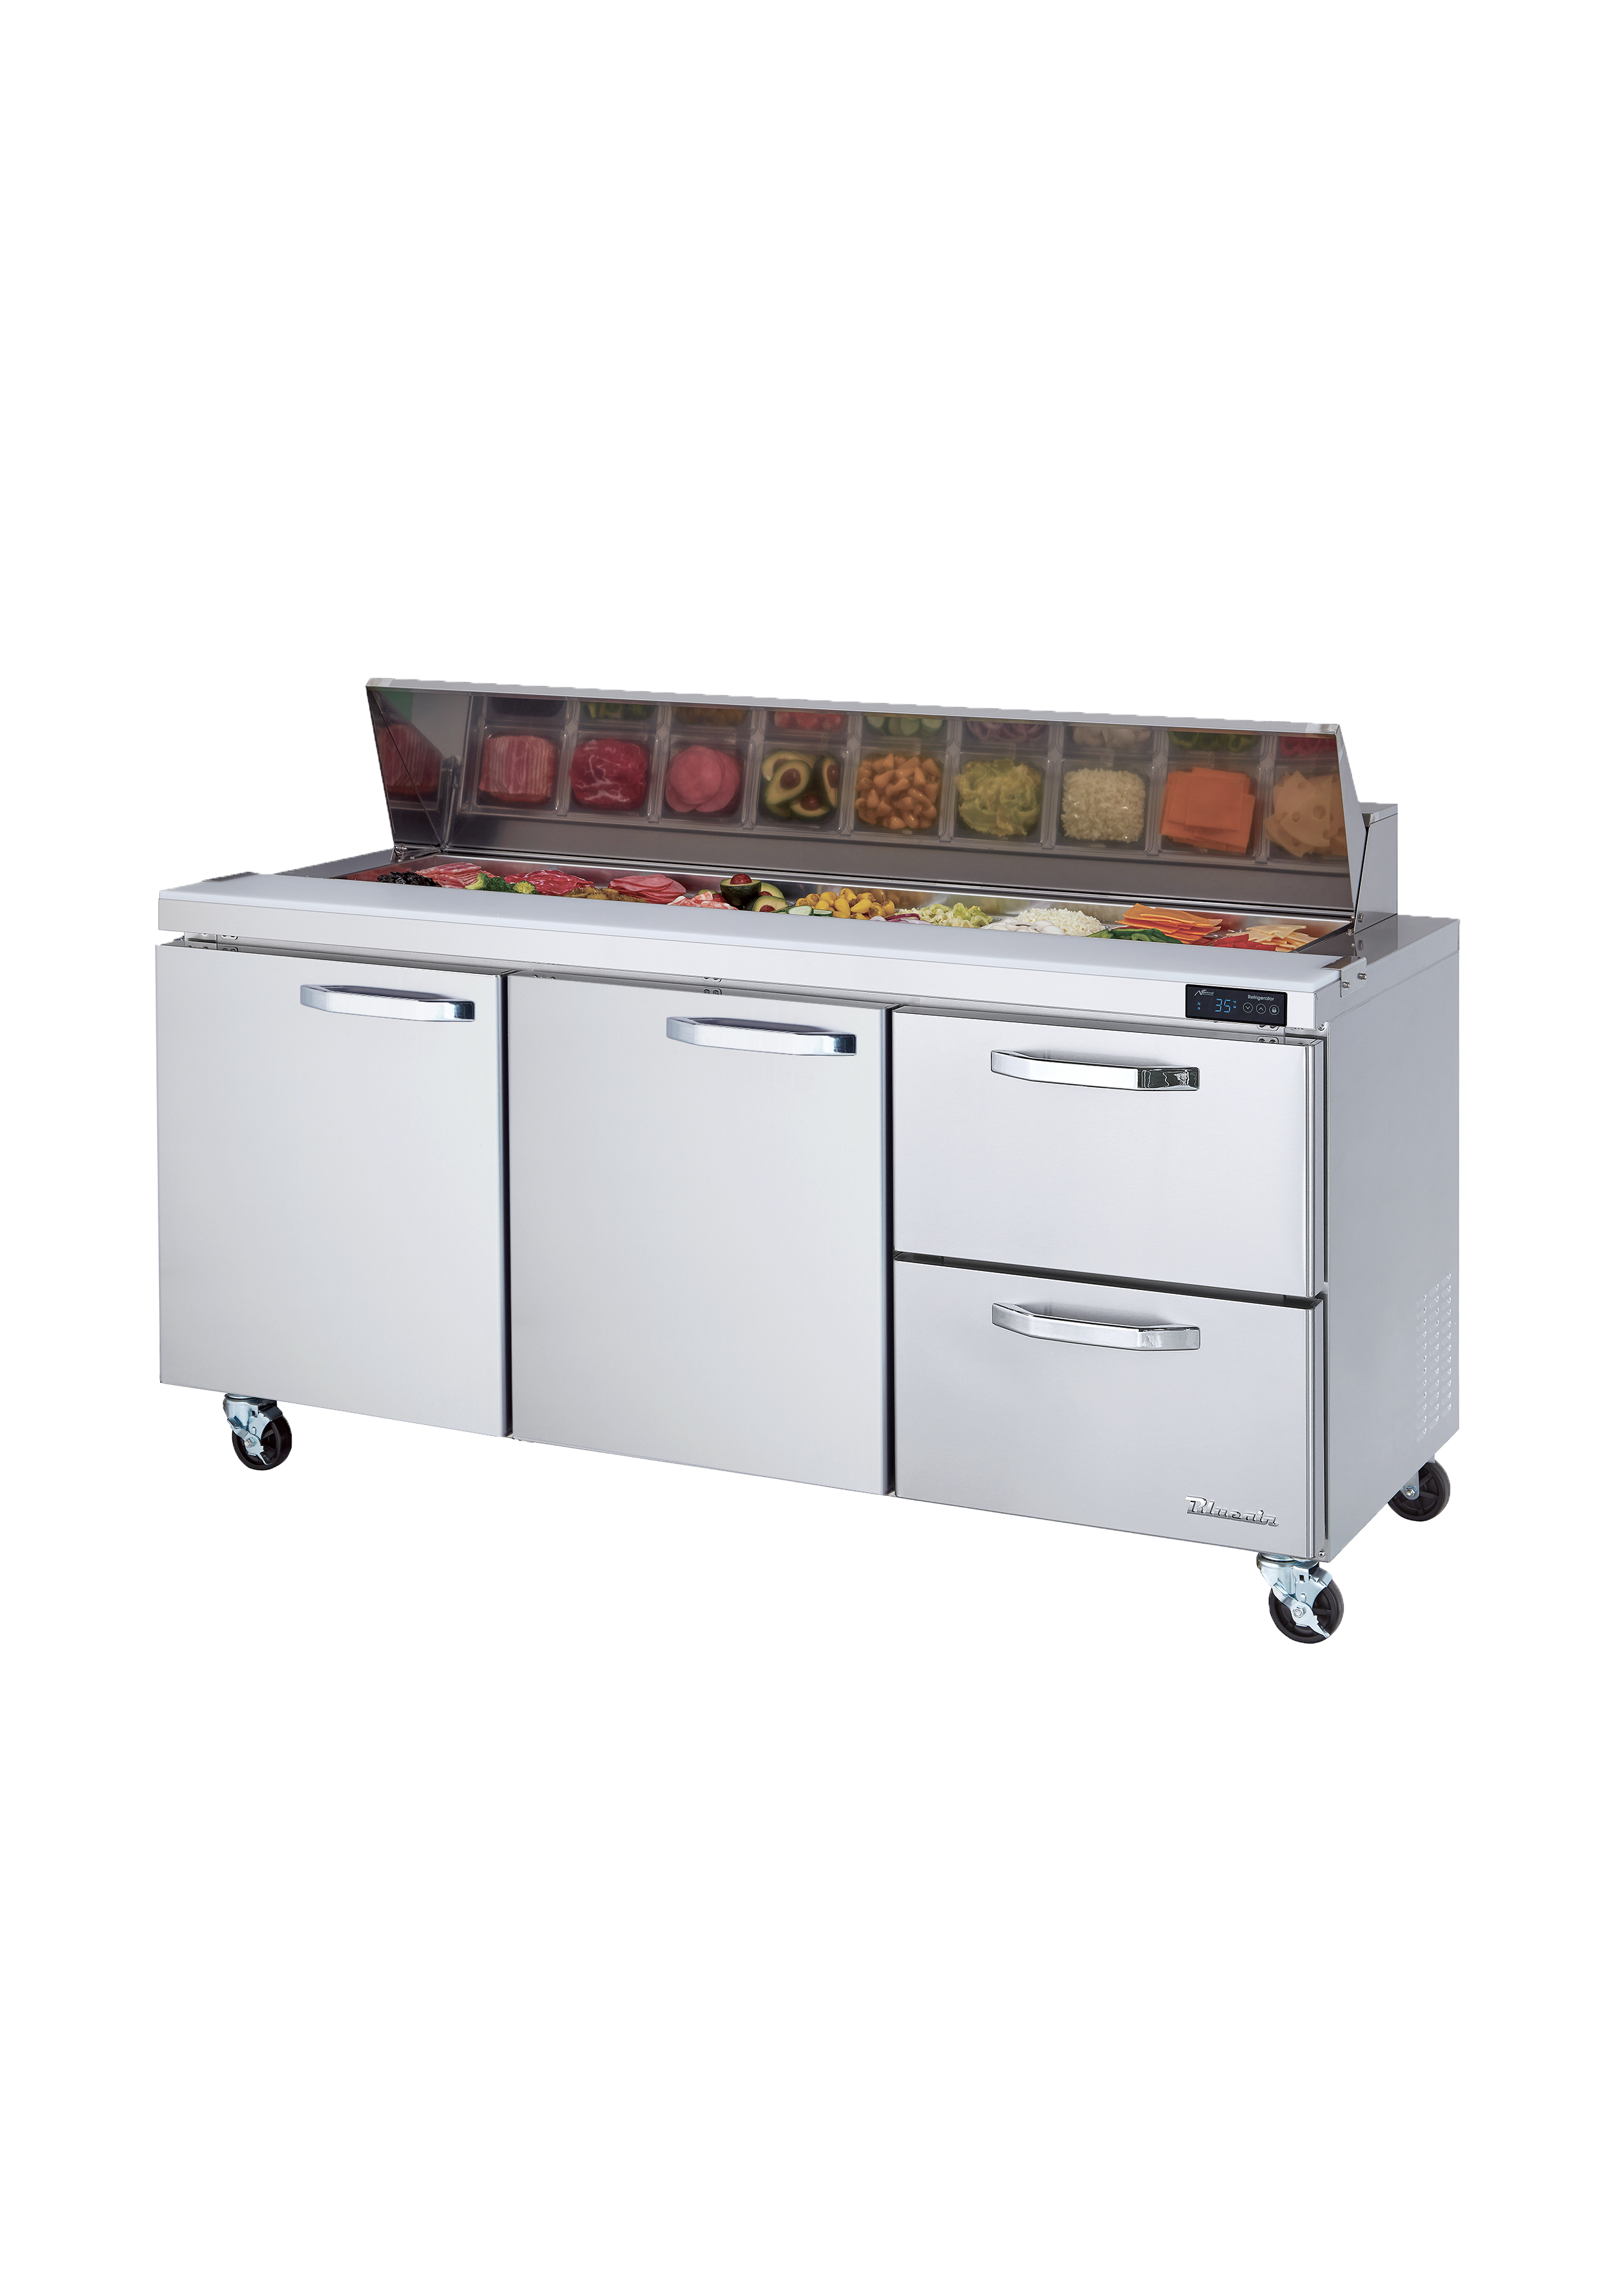 Blue Air - BLPT72-D2R-HC, 2 Drawers 2 Doors (L, M) All Stainless Prep. Table with (18) 1/6 Pans - 72" wide, 20 cu/ft., R-290 Refrigerant